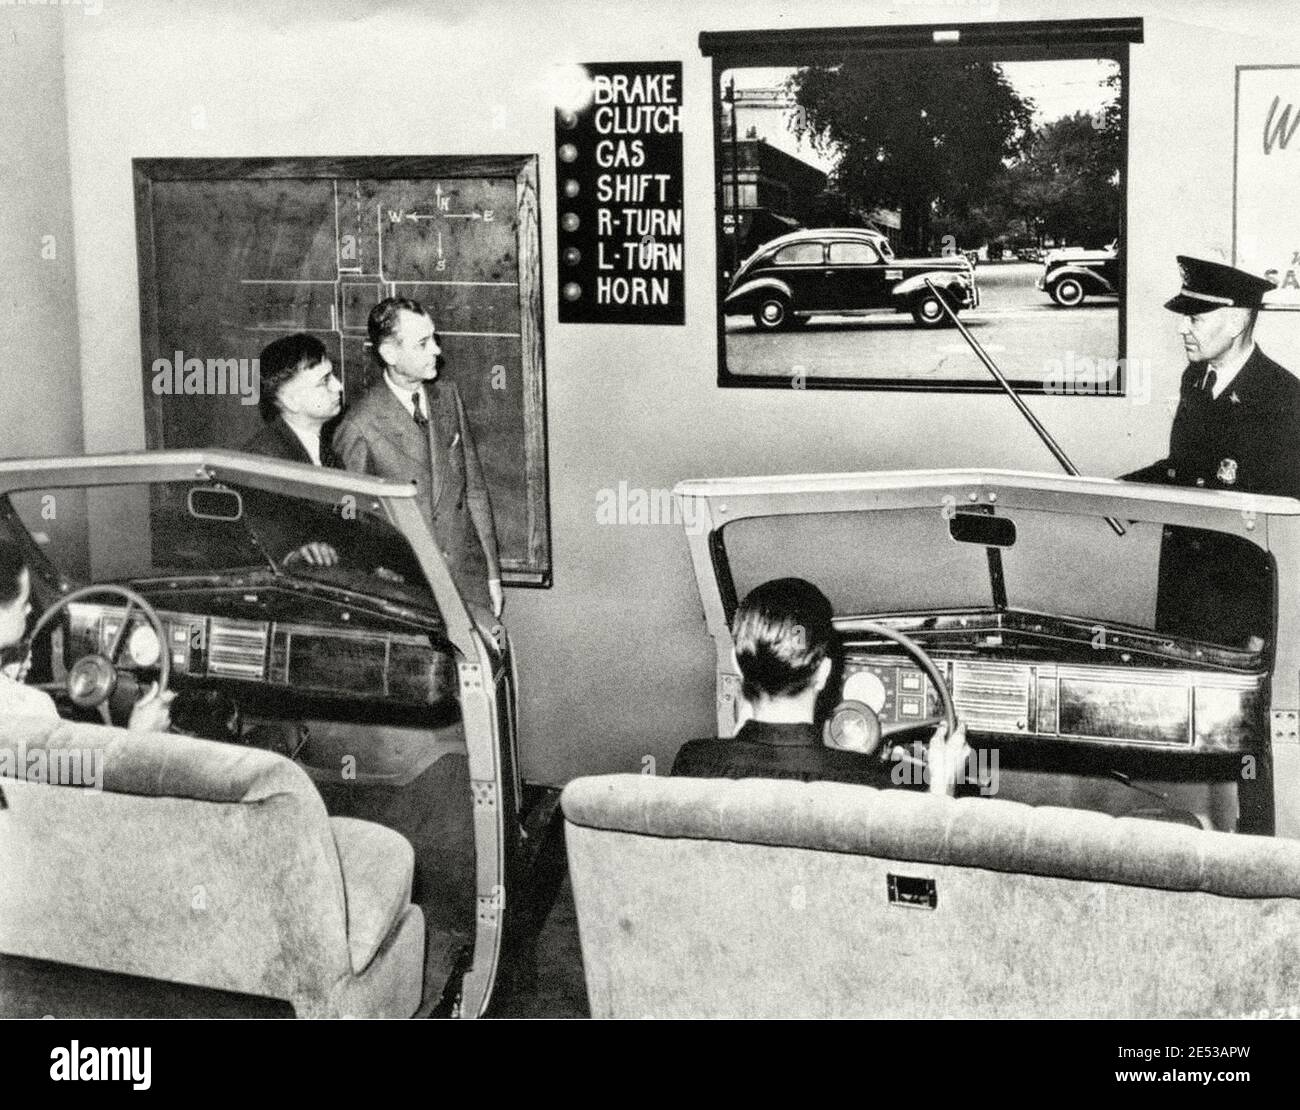 Driving lessons at the University of Highland Park, Michigan, USA. 1939. Stock Photo